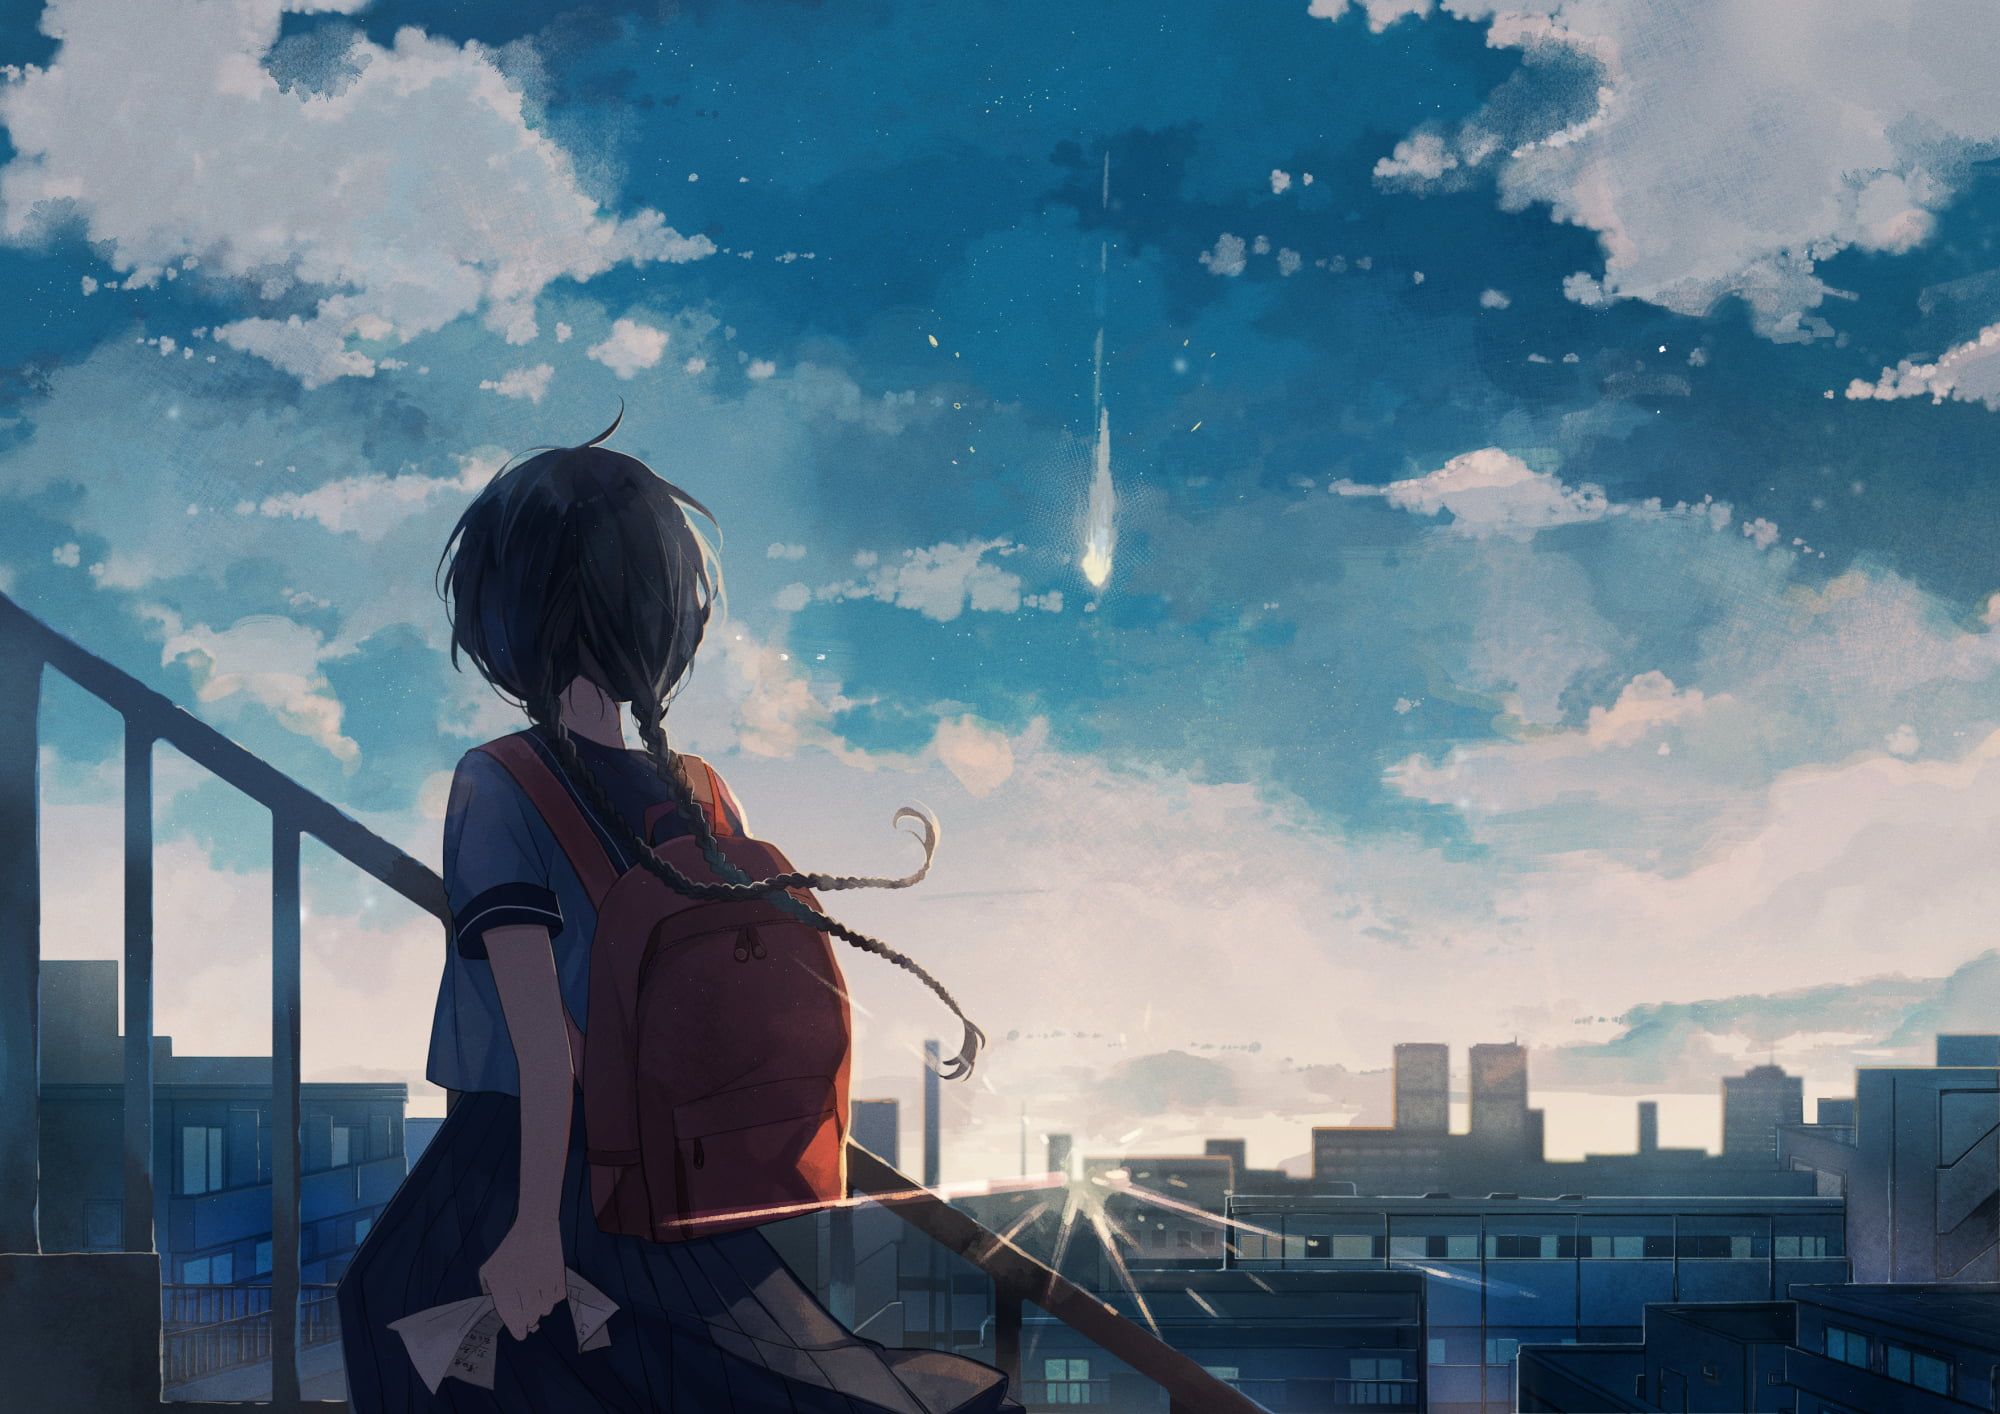 Black Haired Female Anime Character Illustration, Sky Blue, Clouds